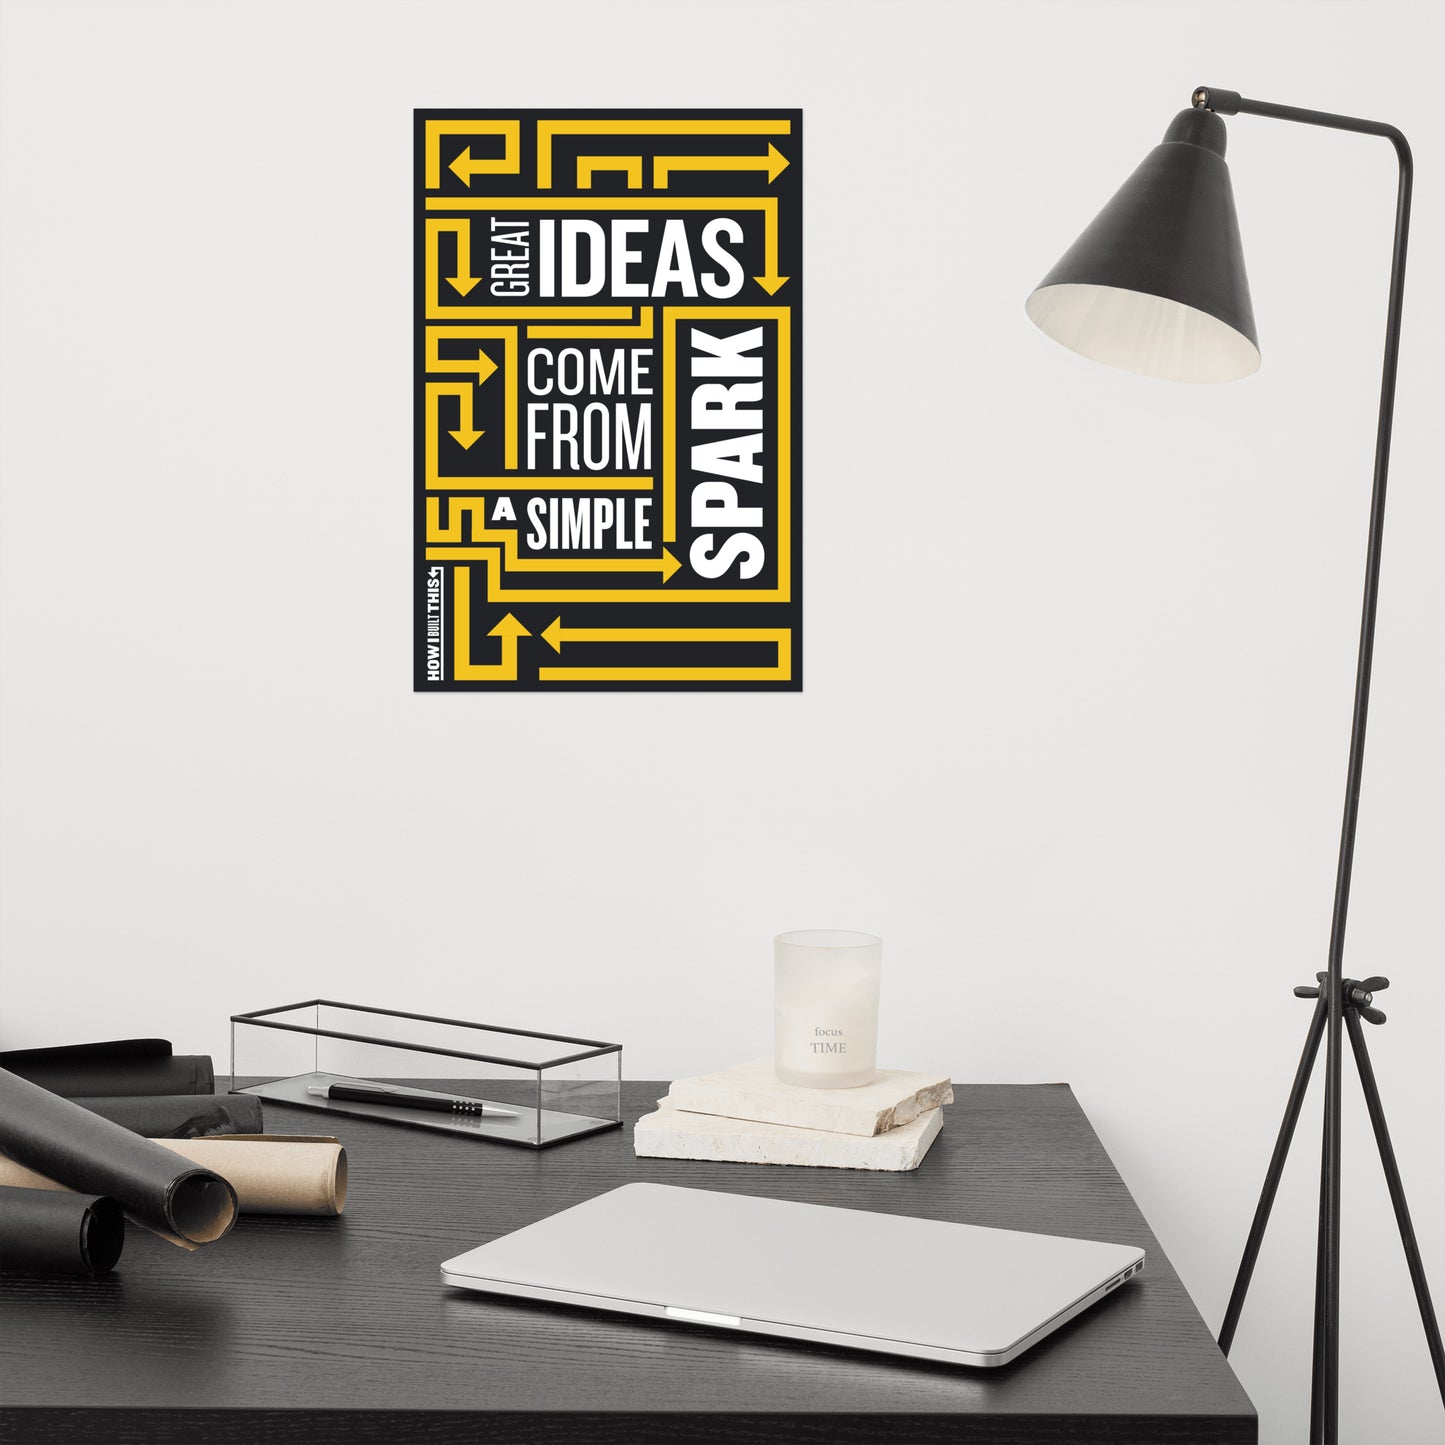 How I Built This Great Ideas Premium Poster